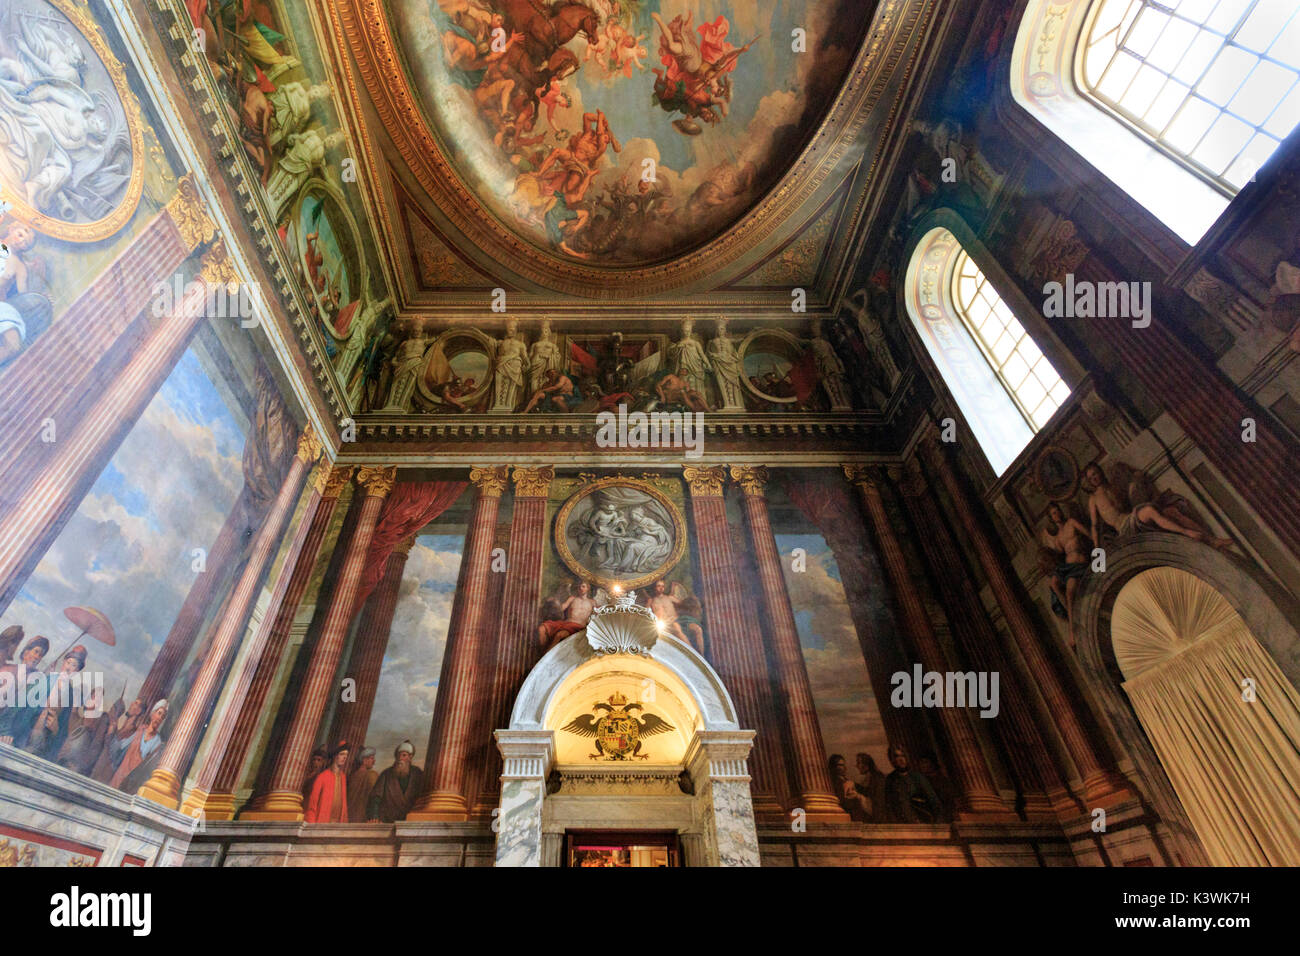 The painted walls and ceiling of the Grand Salon at Blenheim Palace, Oxfordshire, England Stock Photo